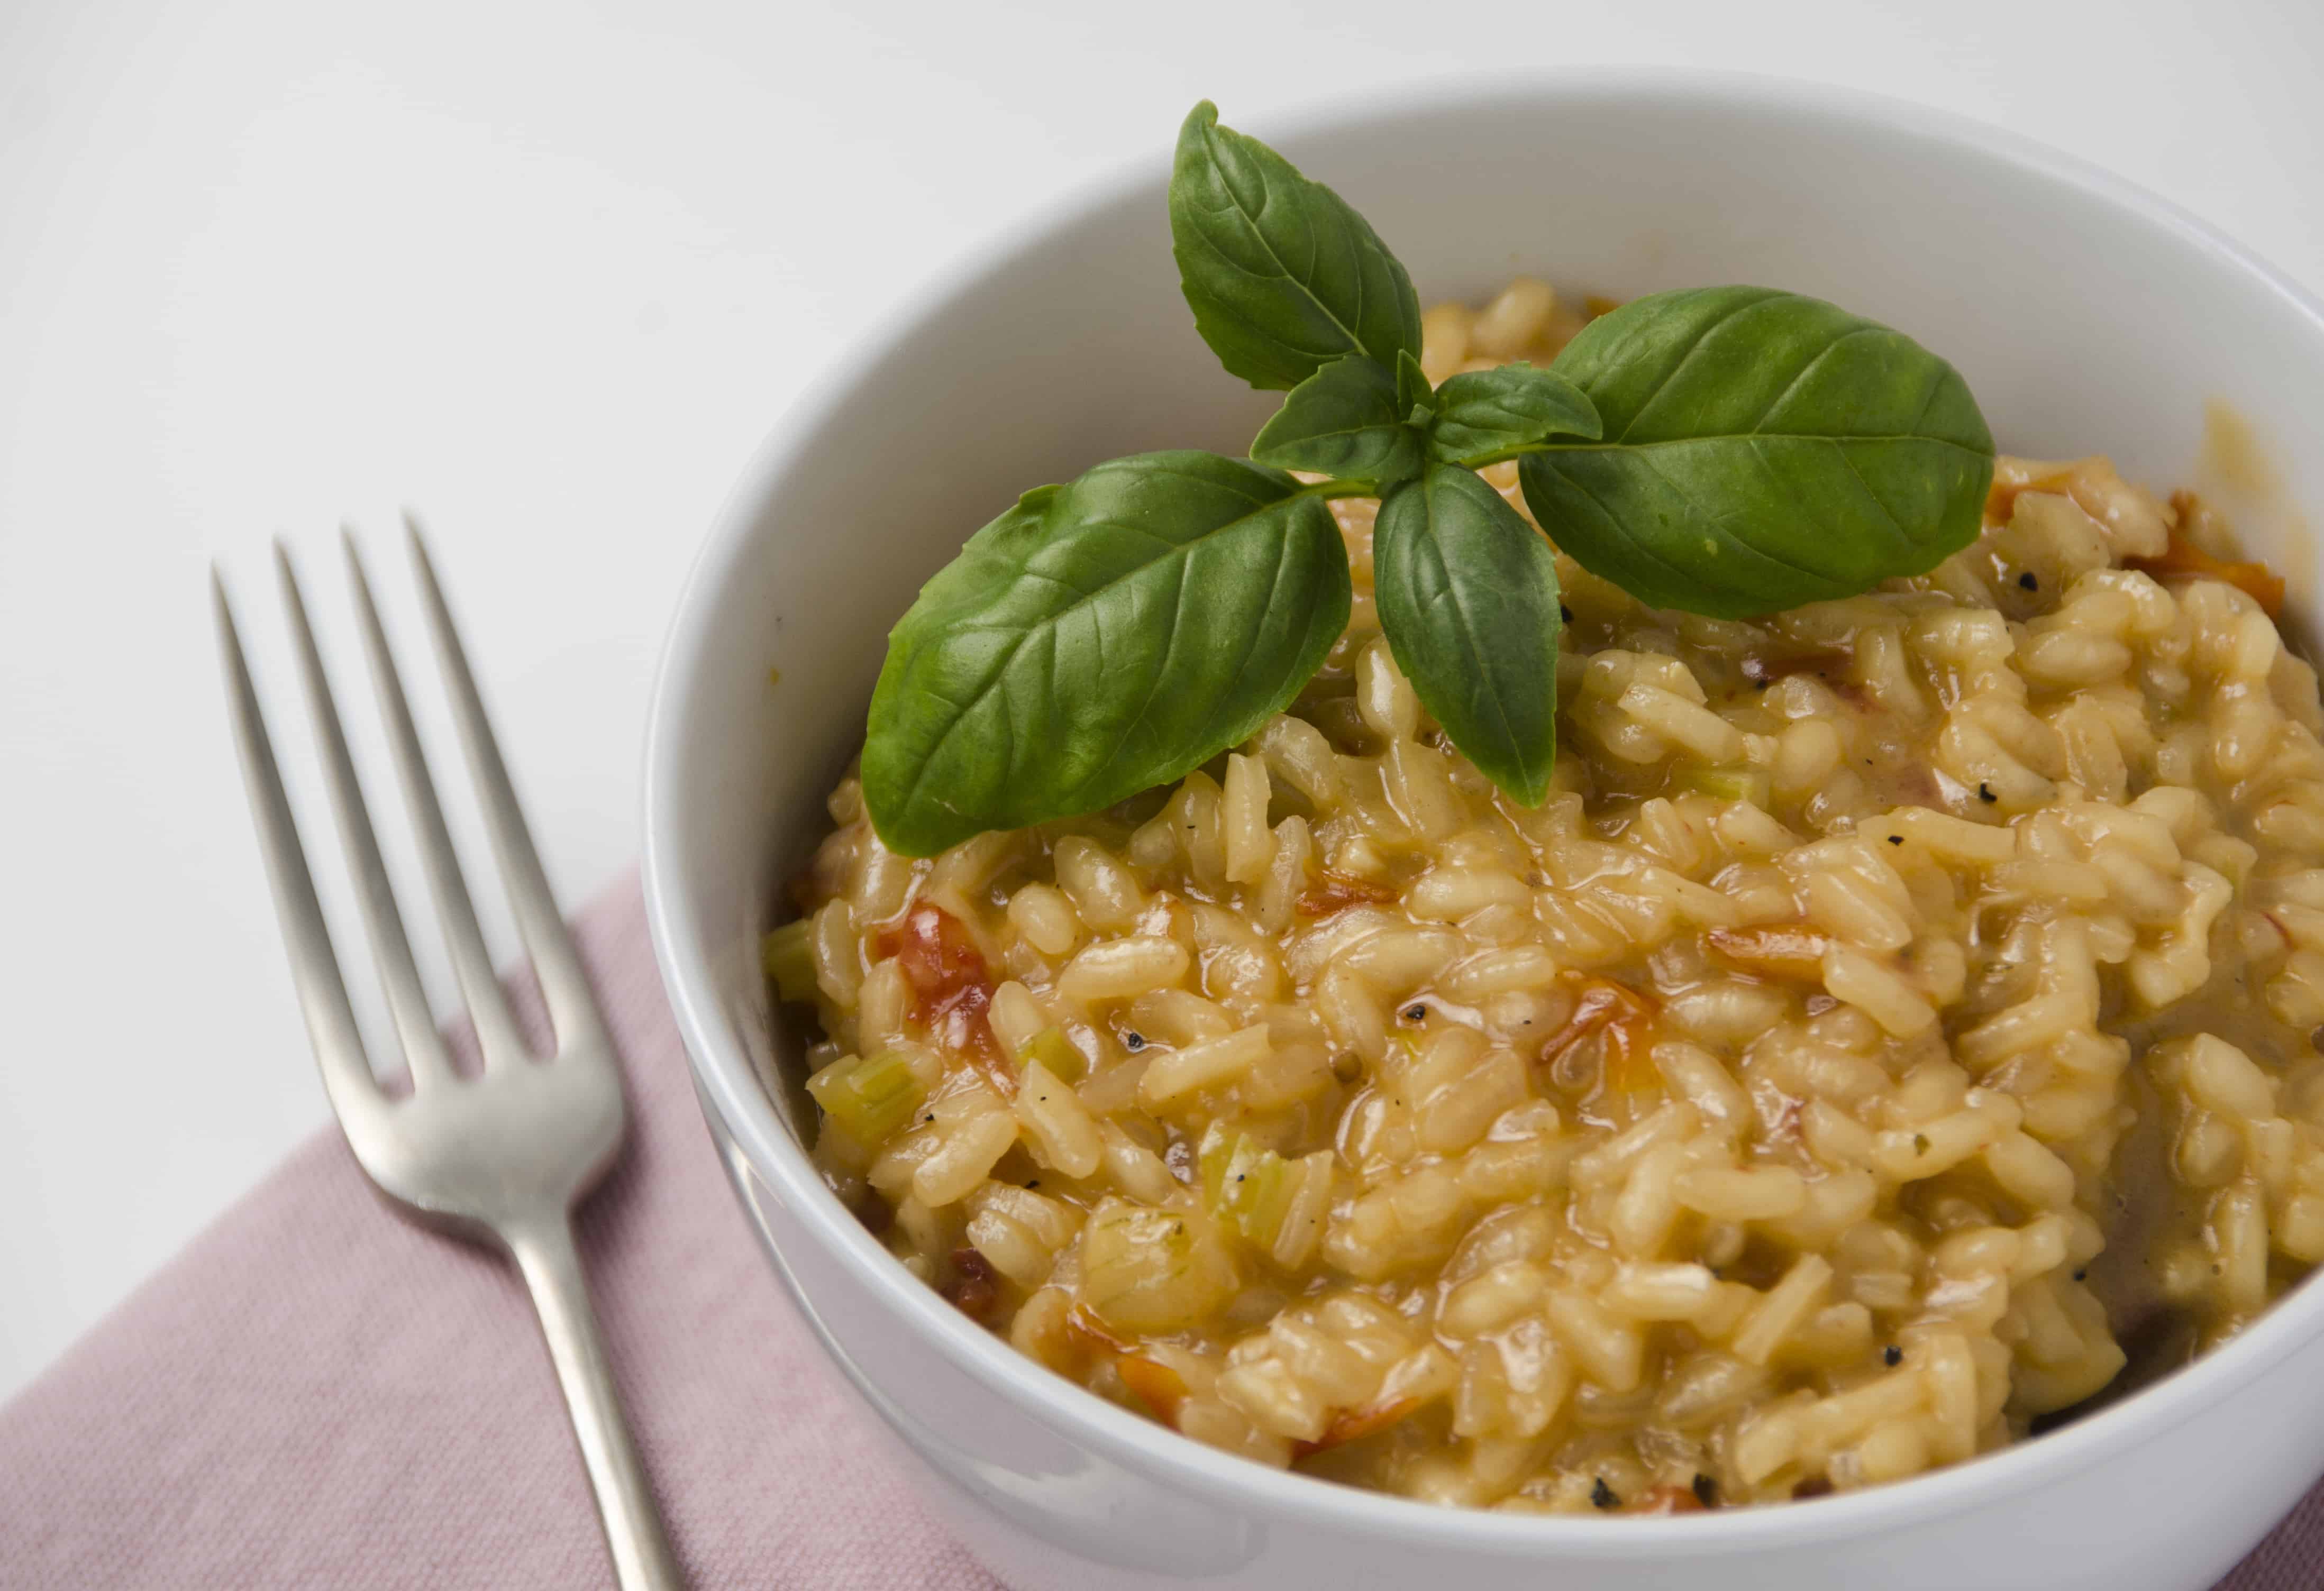 A bowl of tomato based risotto garnished with basil and served in a white bowl on a pink napkin with a fork to the side.